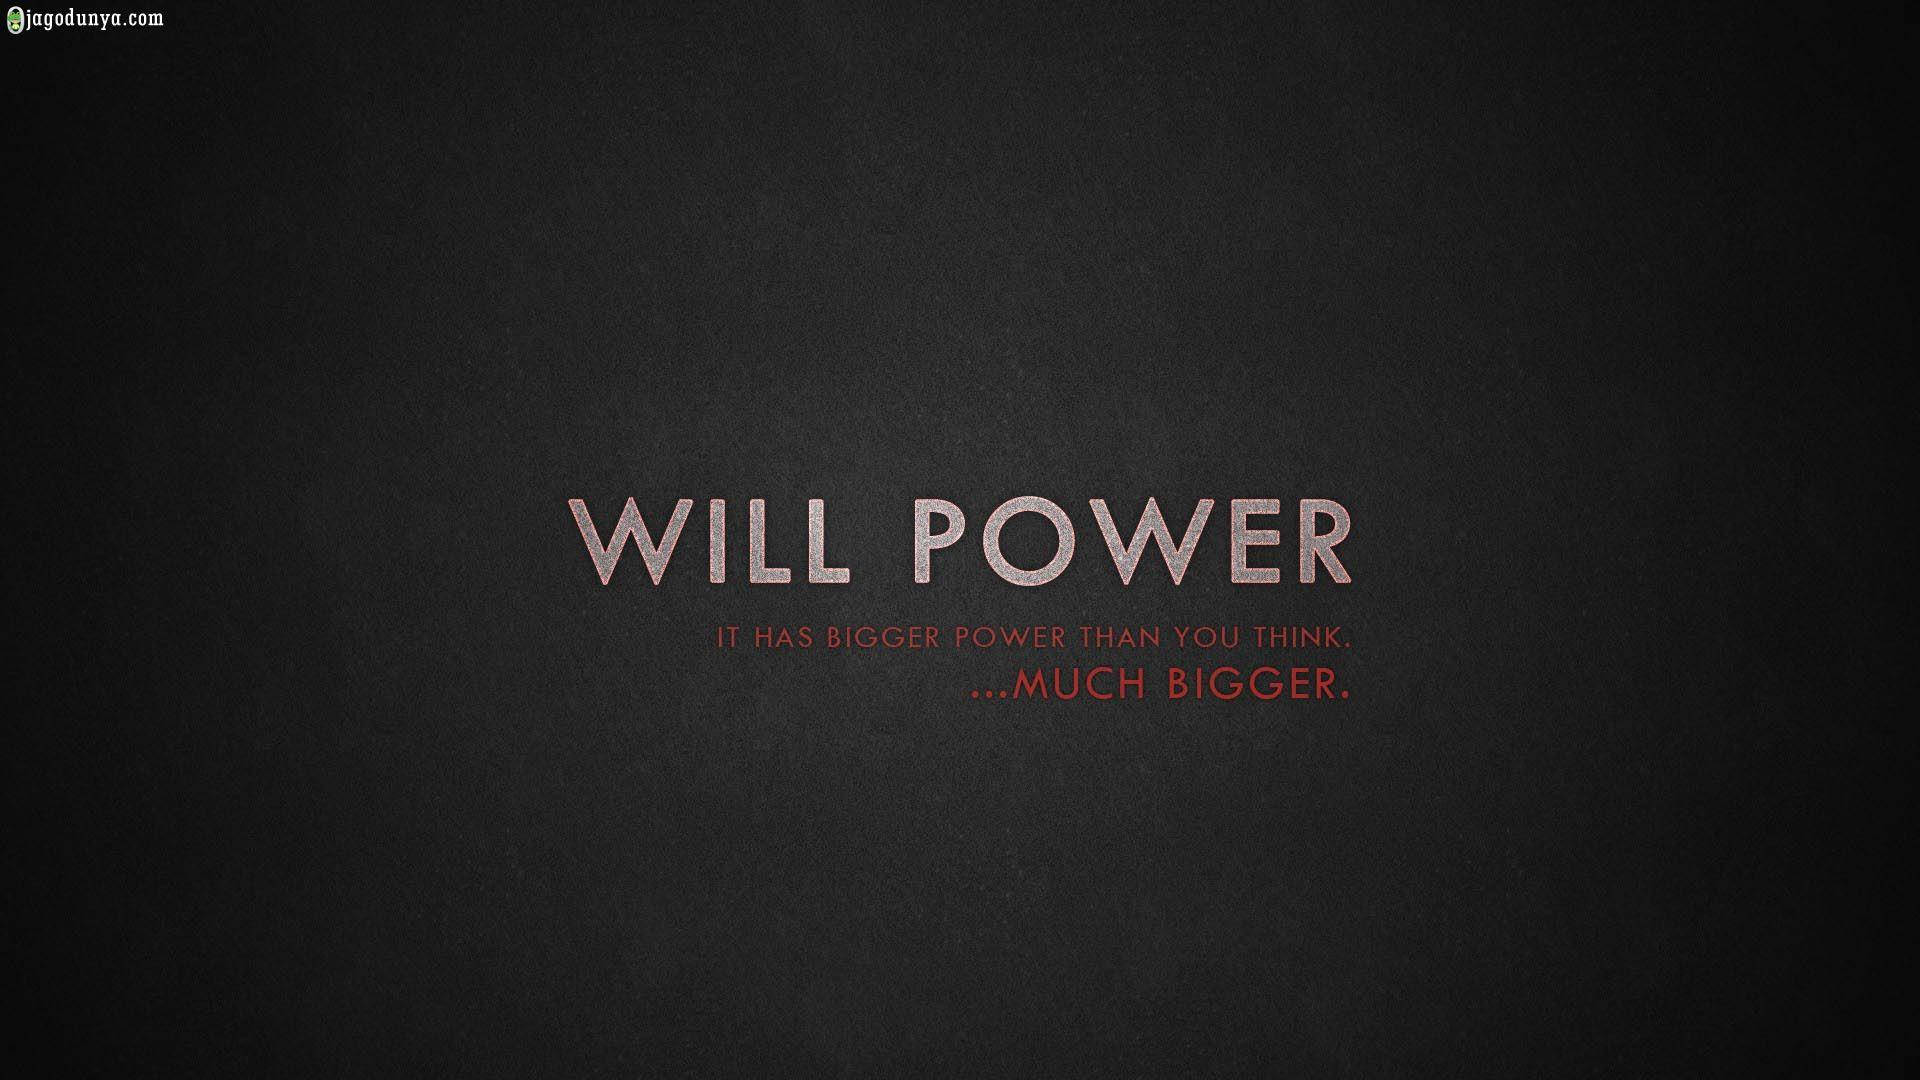 Will Power Motivational Hd Quotation